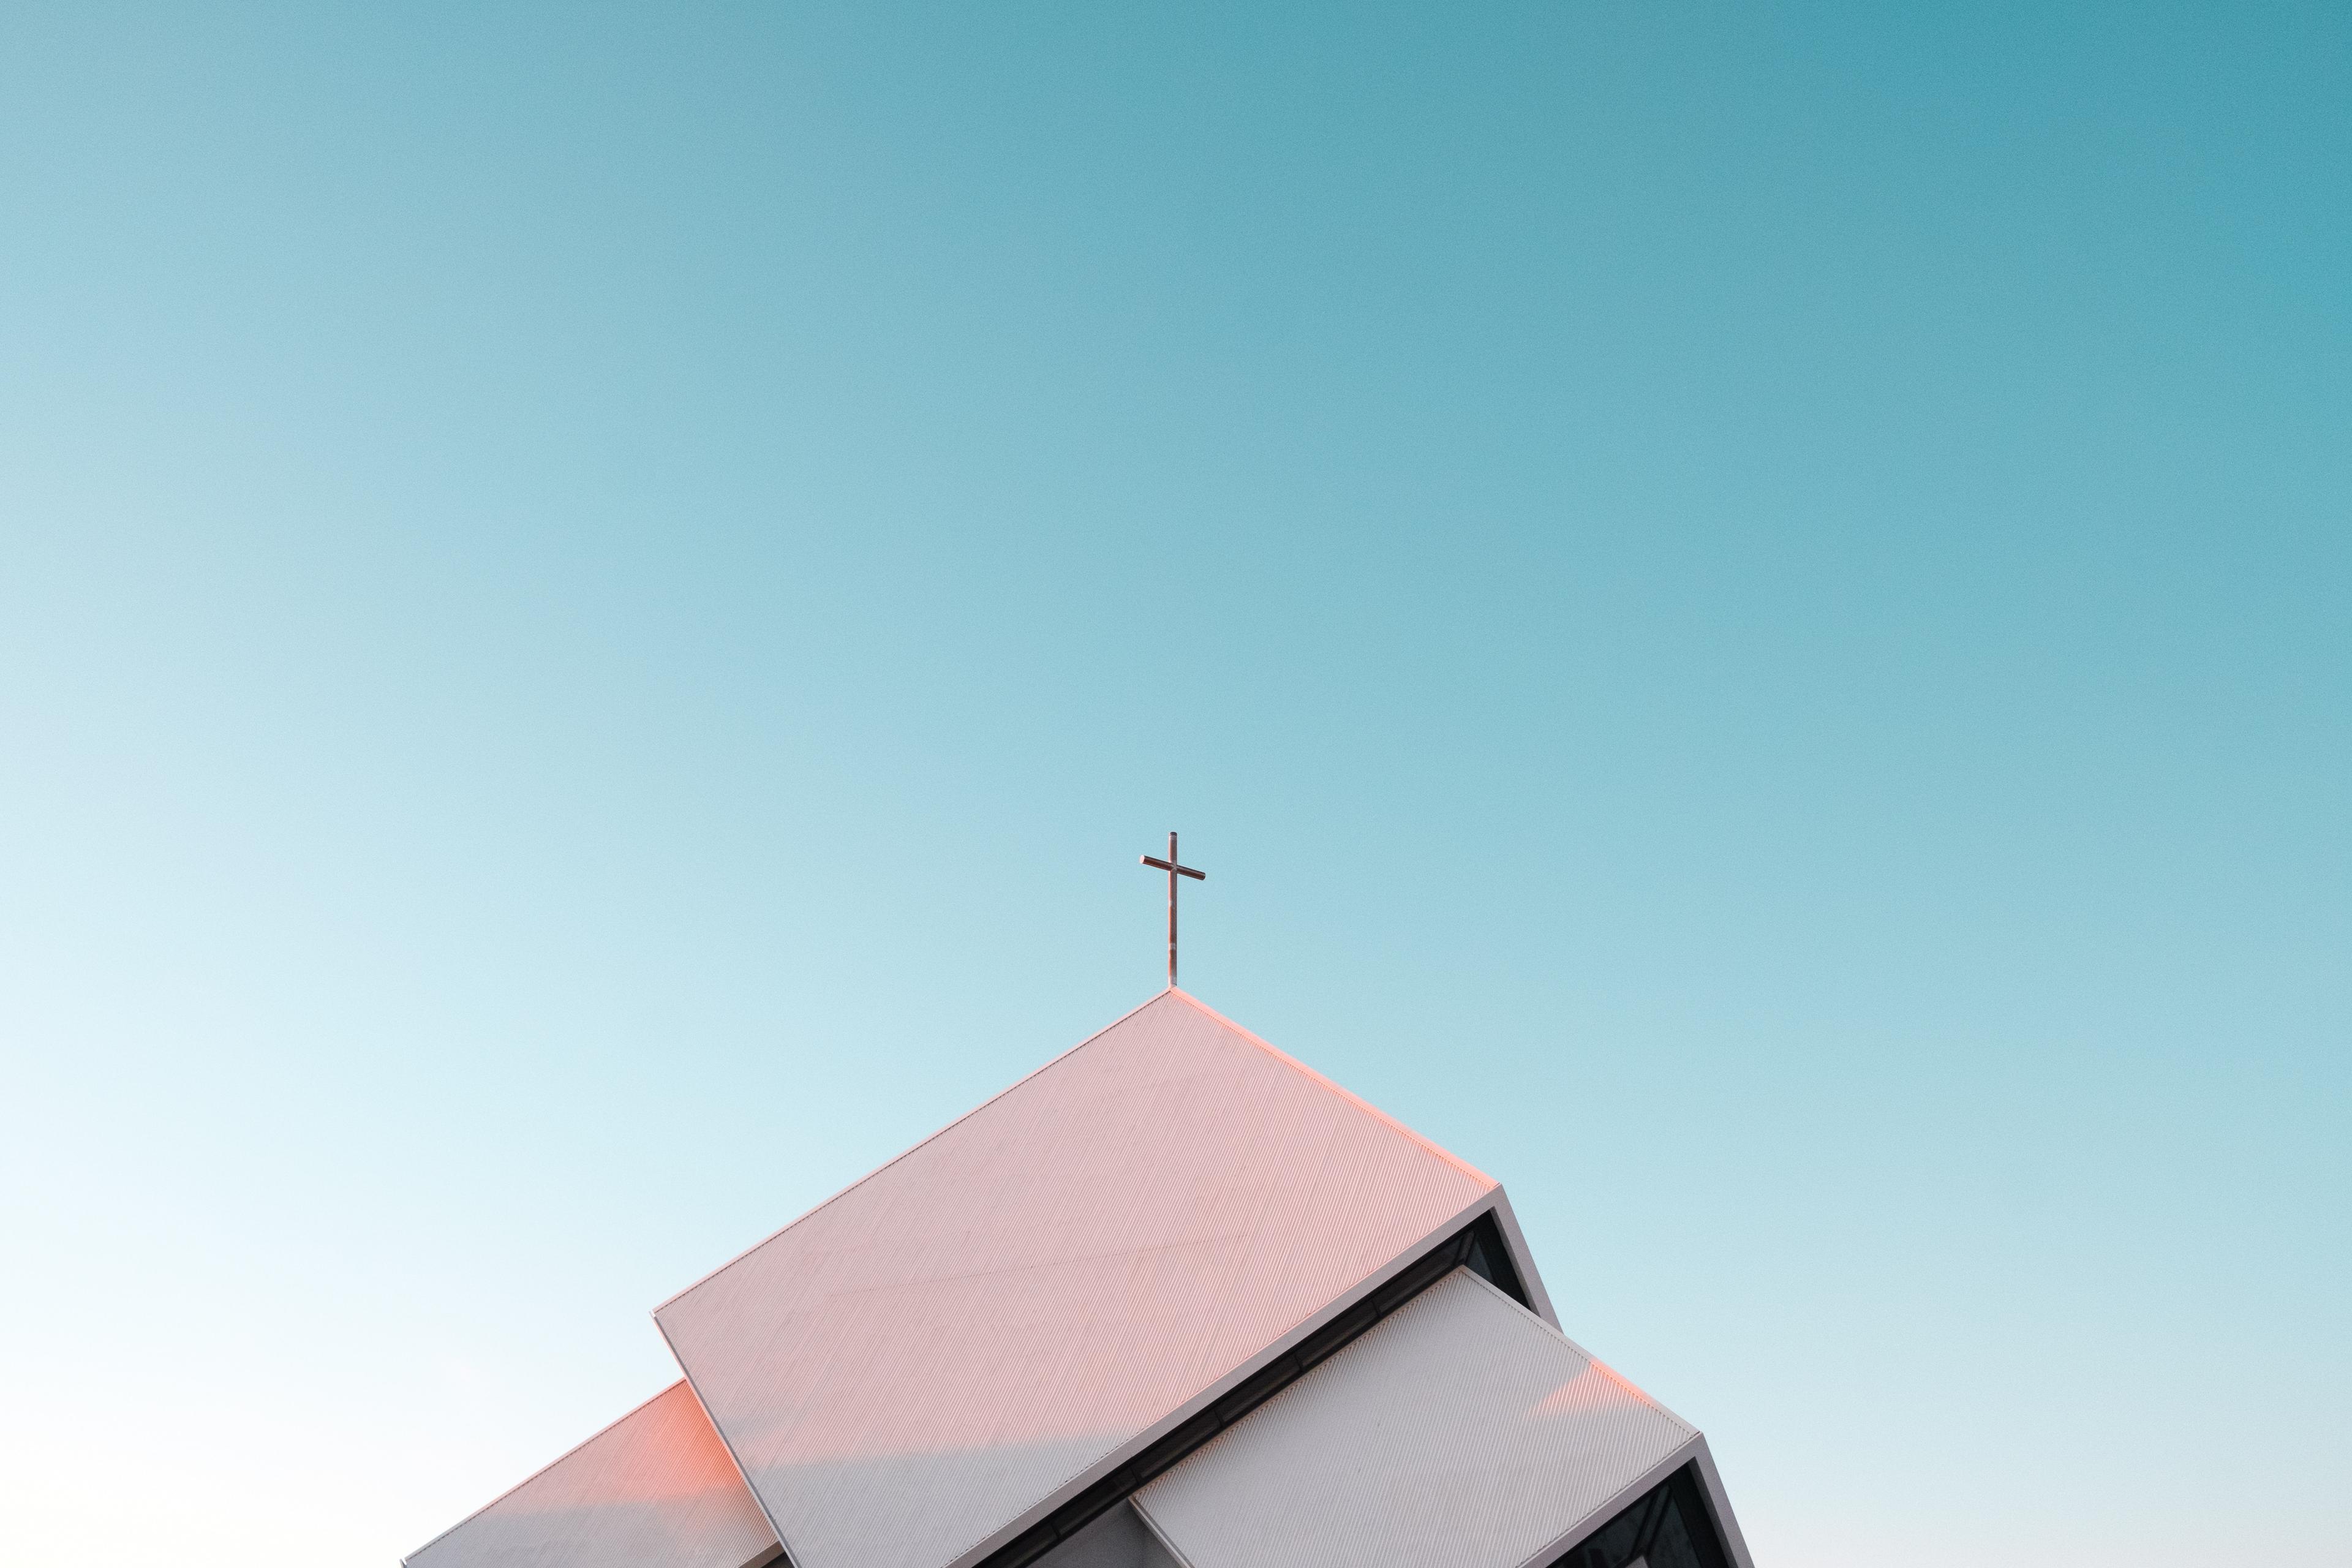 The image features the peak of a modern church with an angular, geometric roofline and a simple cross at the apex, set against a soft gradient sky transitioning from warm pink to pale blue.